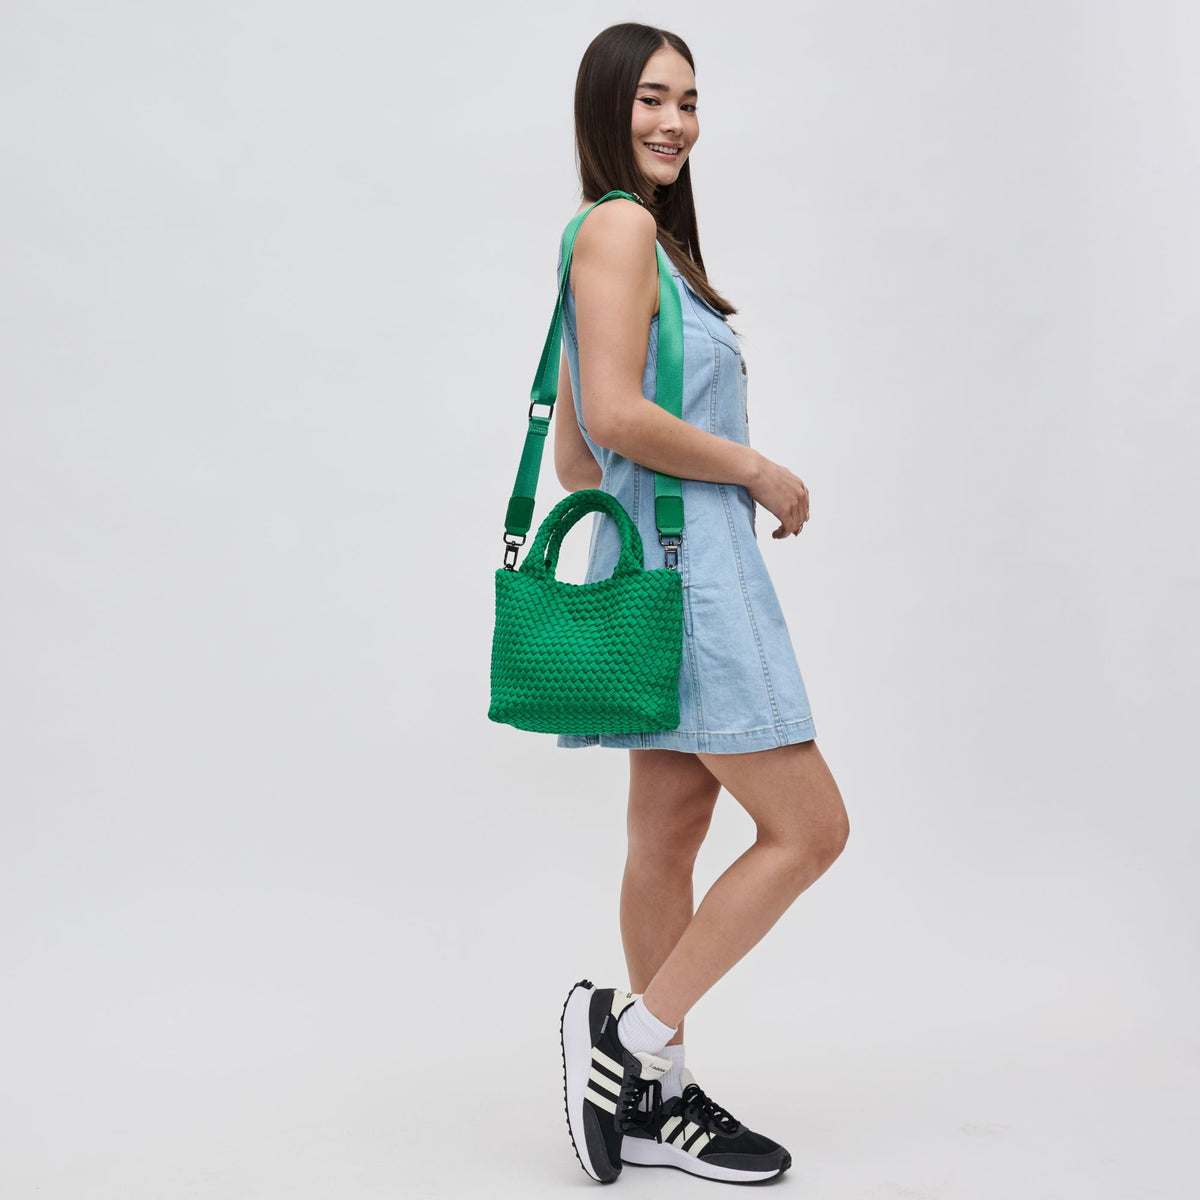 Woman wearing Kelly Green Sol and Selene Sky's The Limit - Small Crossbody 841764109000 View 2 | Kelly Green